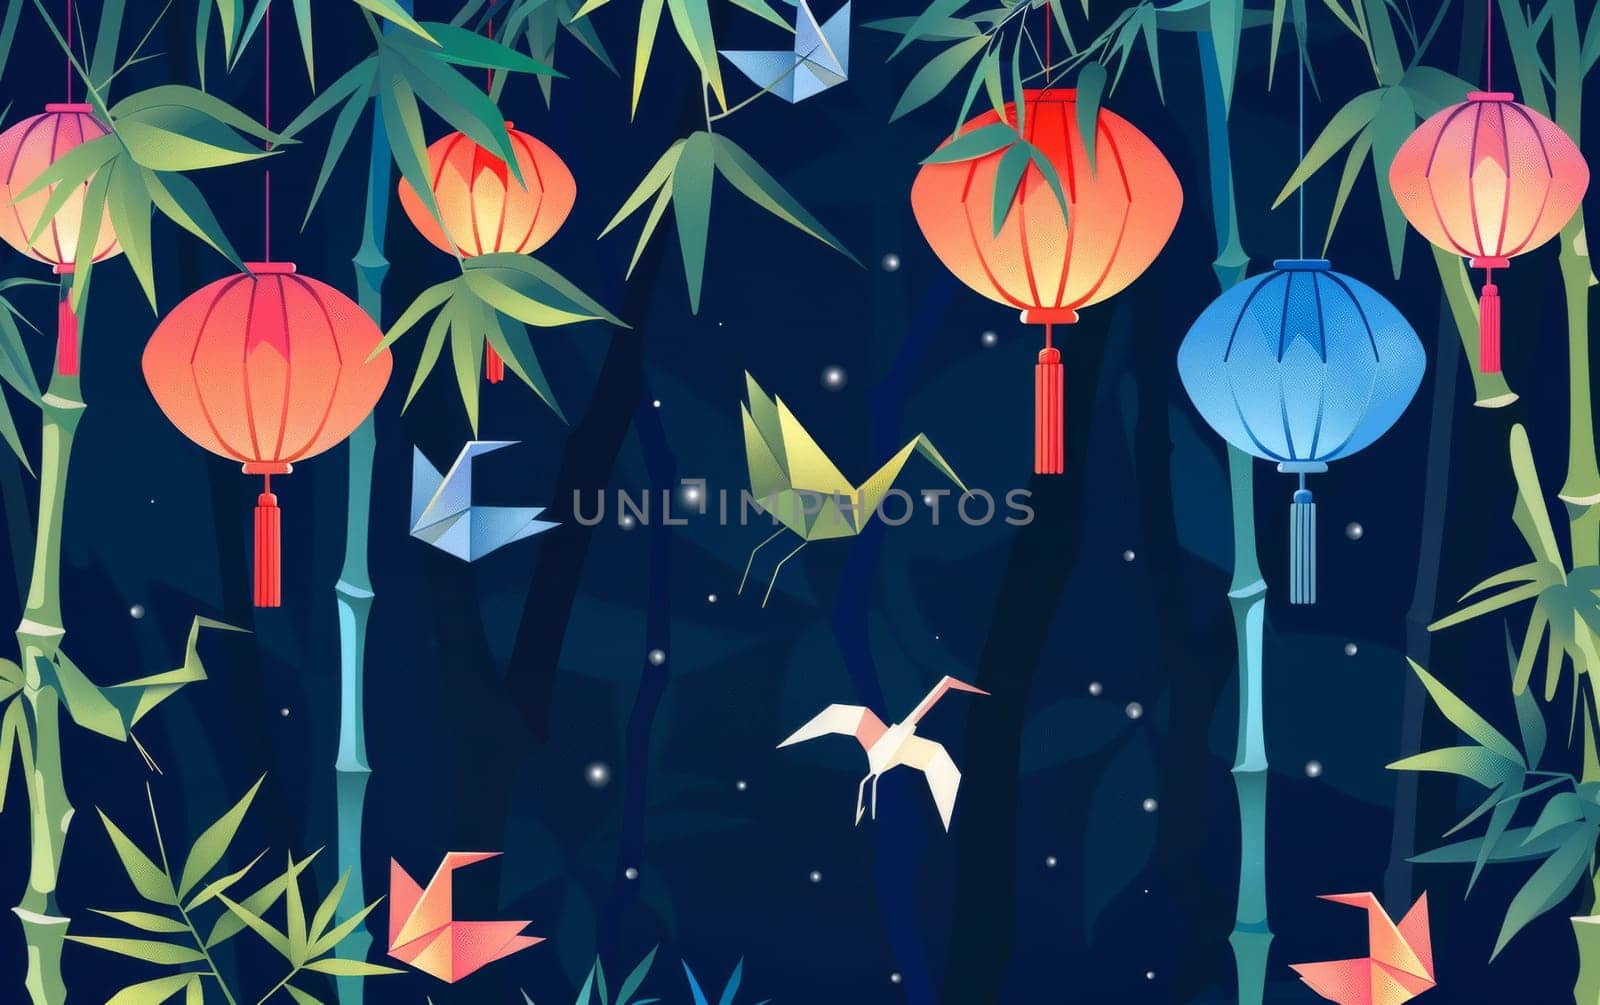 A serene illustration with oriental lanterns glowing among bamboo shoots and floating origami birds, under a starry night sky